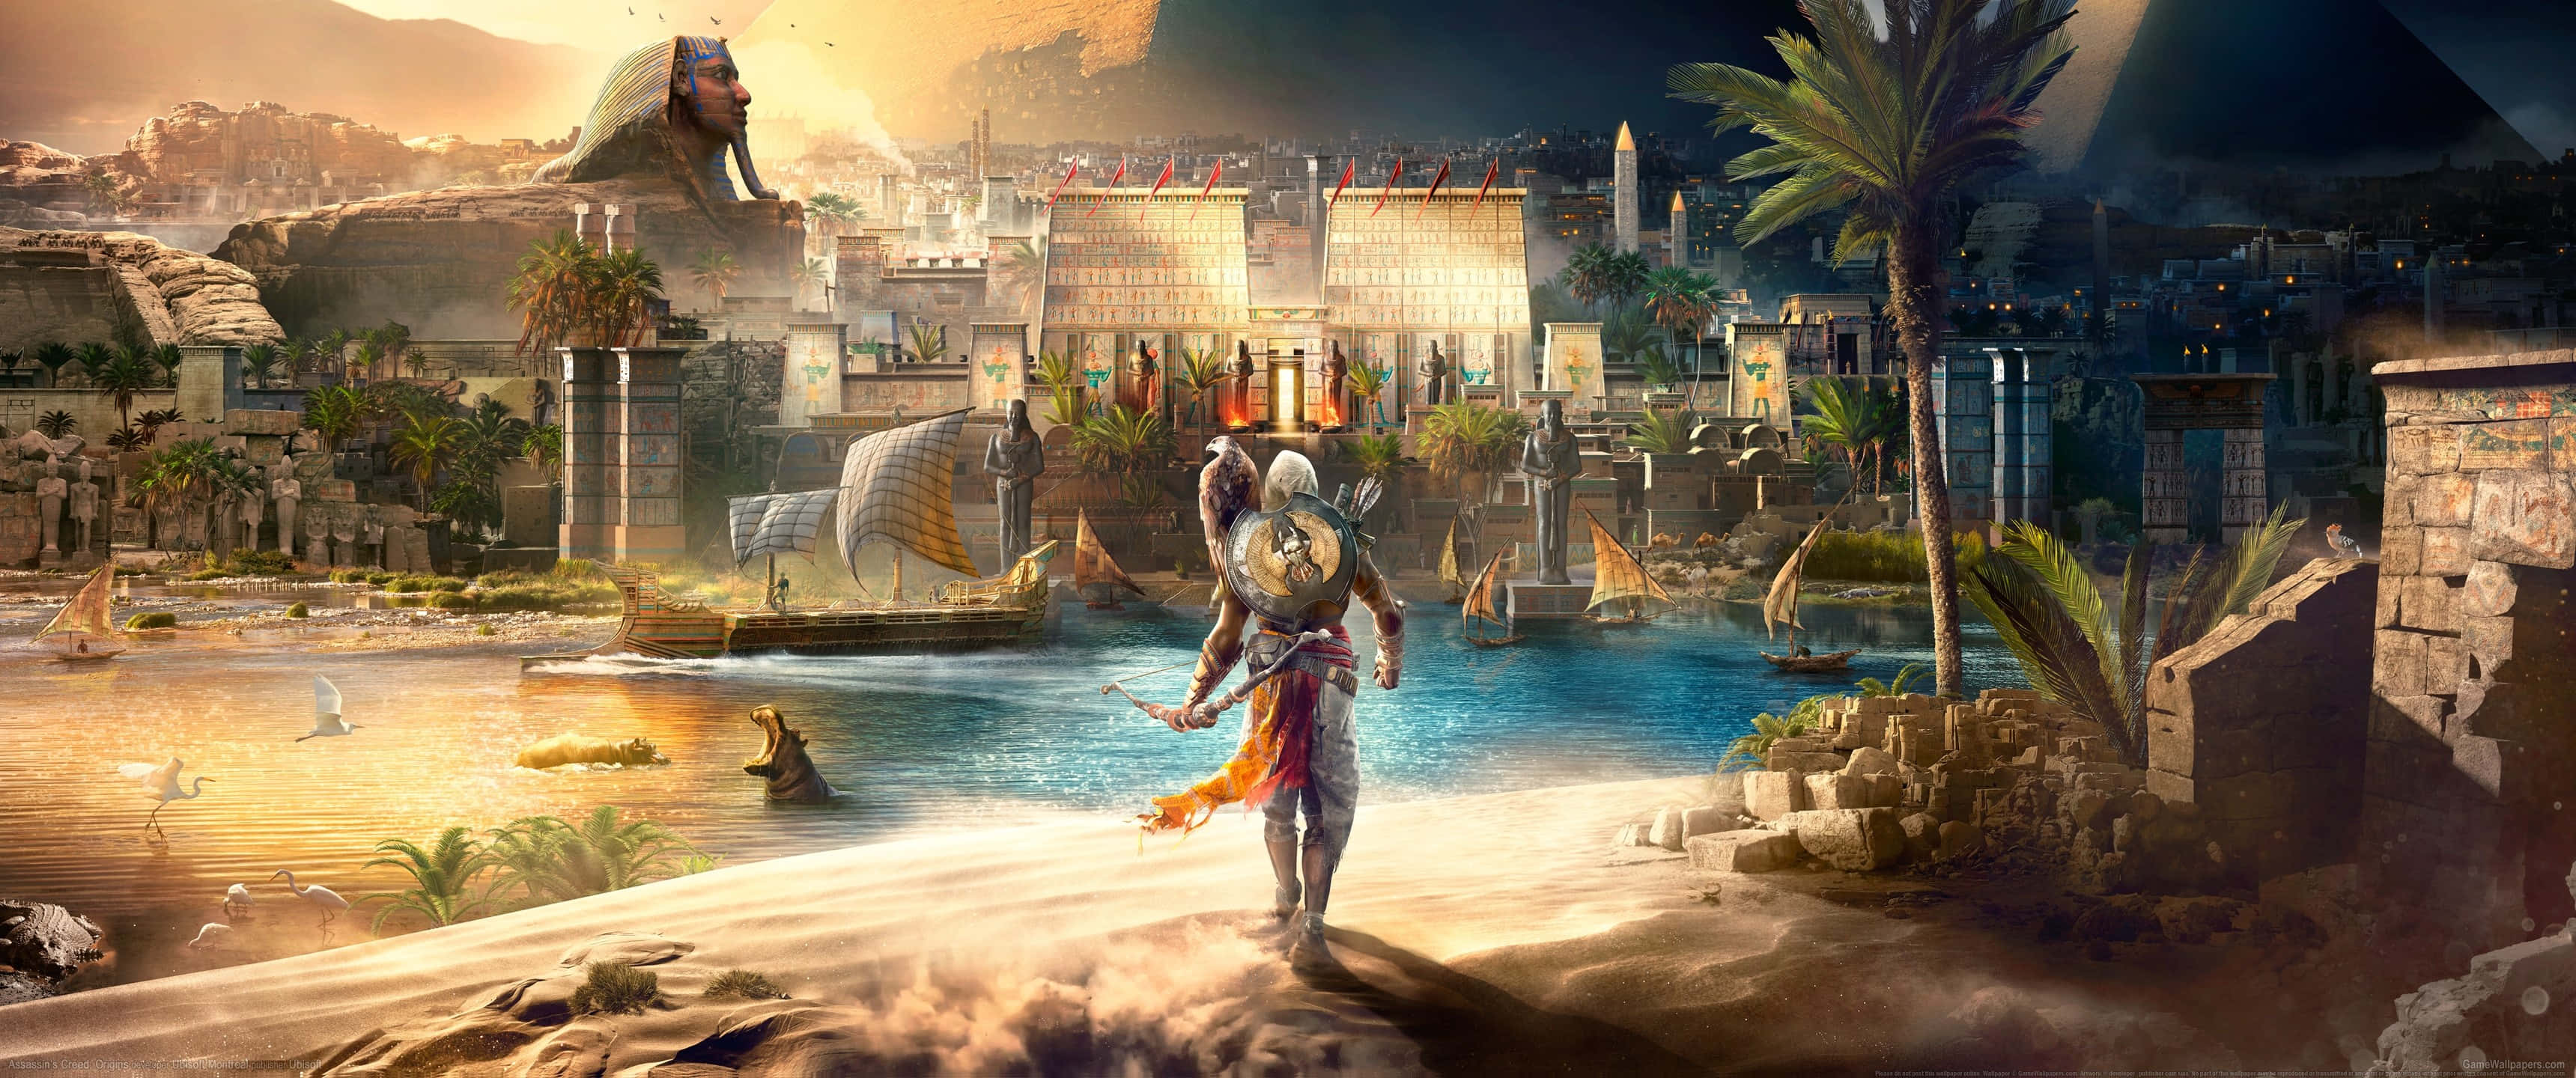 3440x1440p Assassin's Creed Odyssey Background Assassin Facing Egypt Background